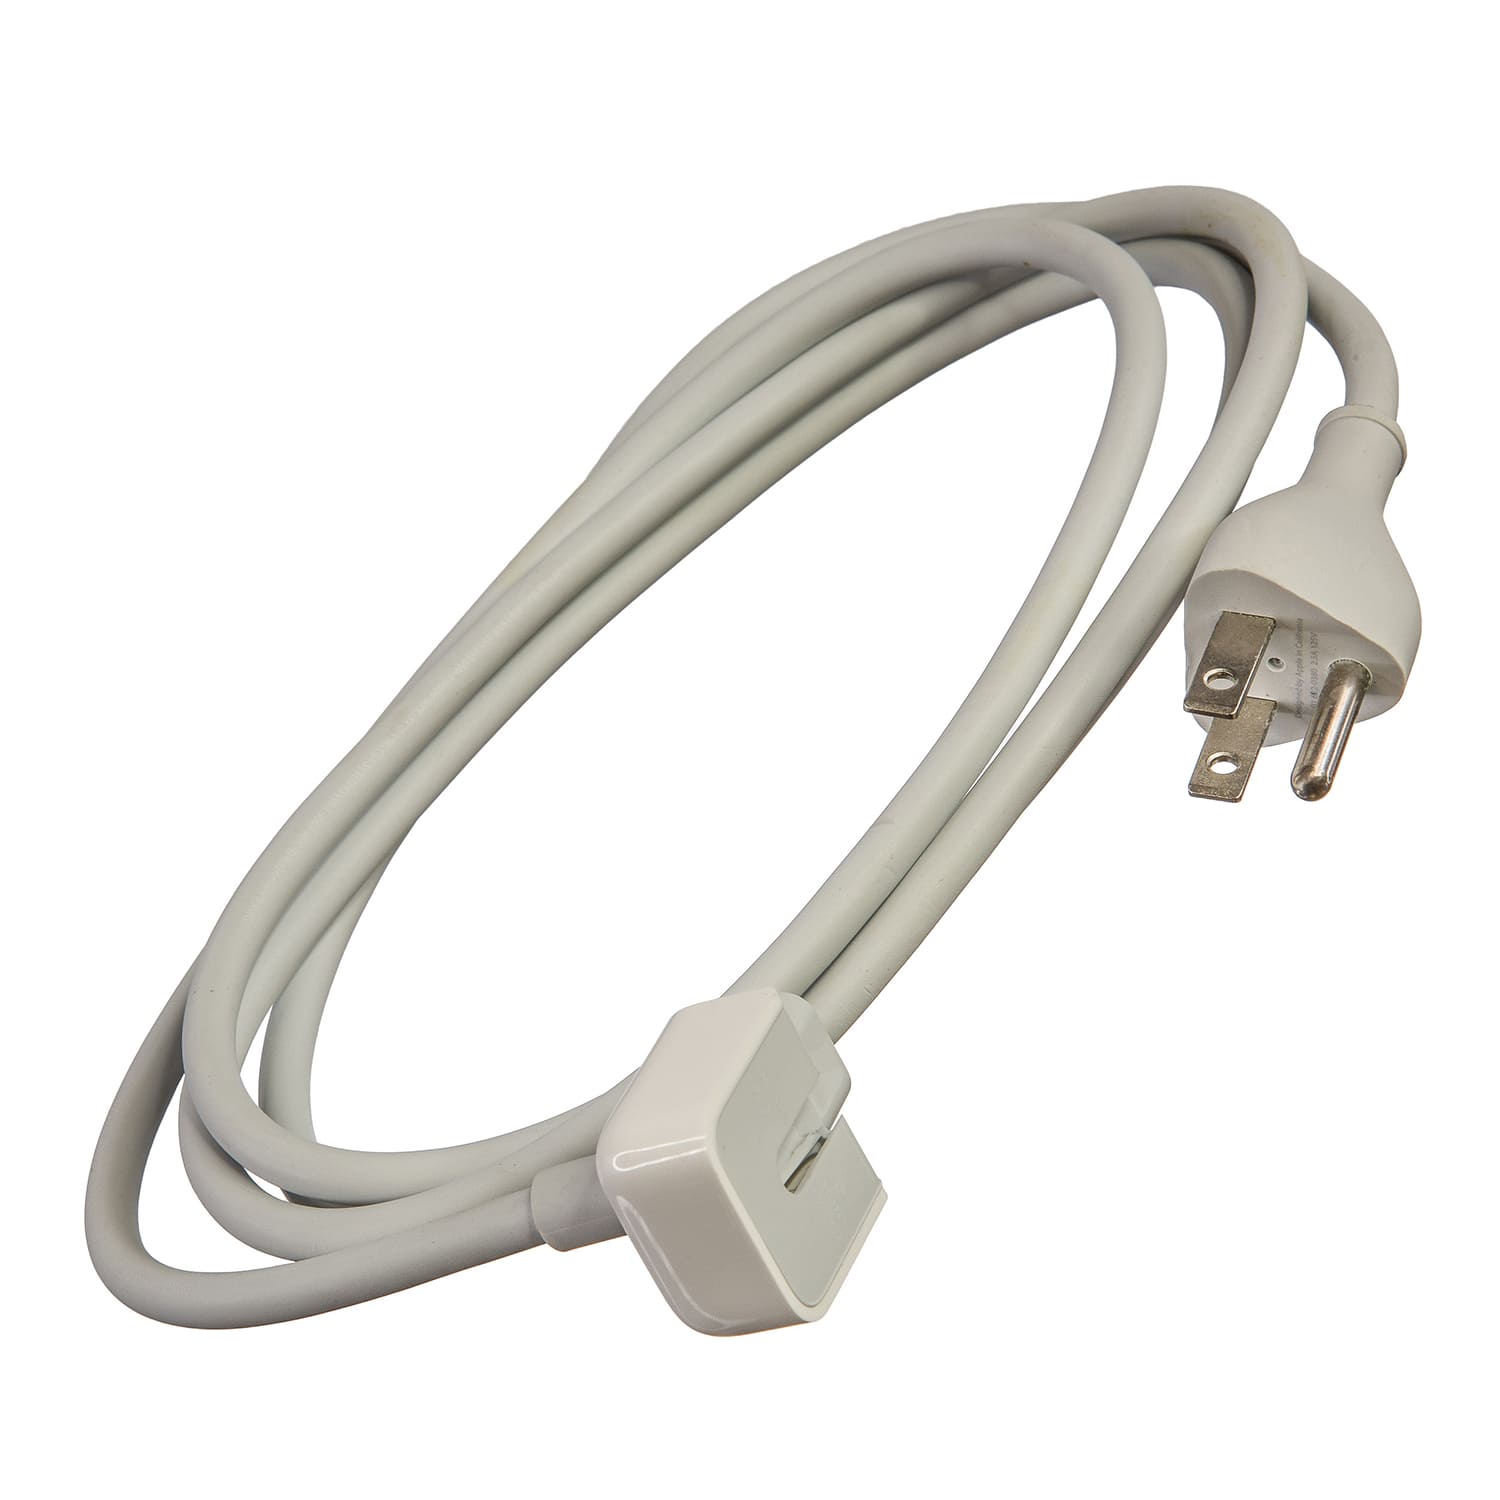 Replacement Power Cable-Mac